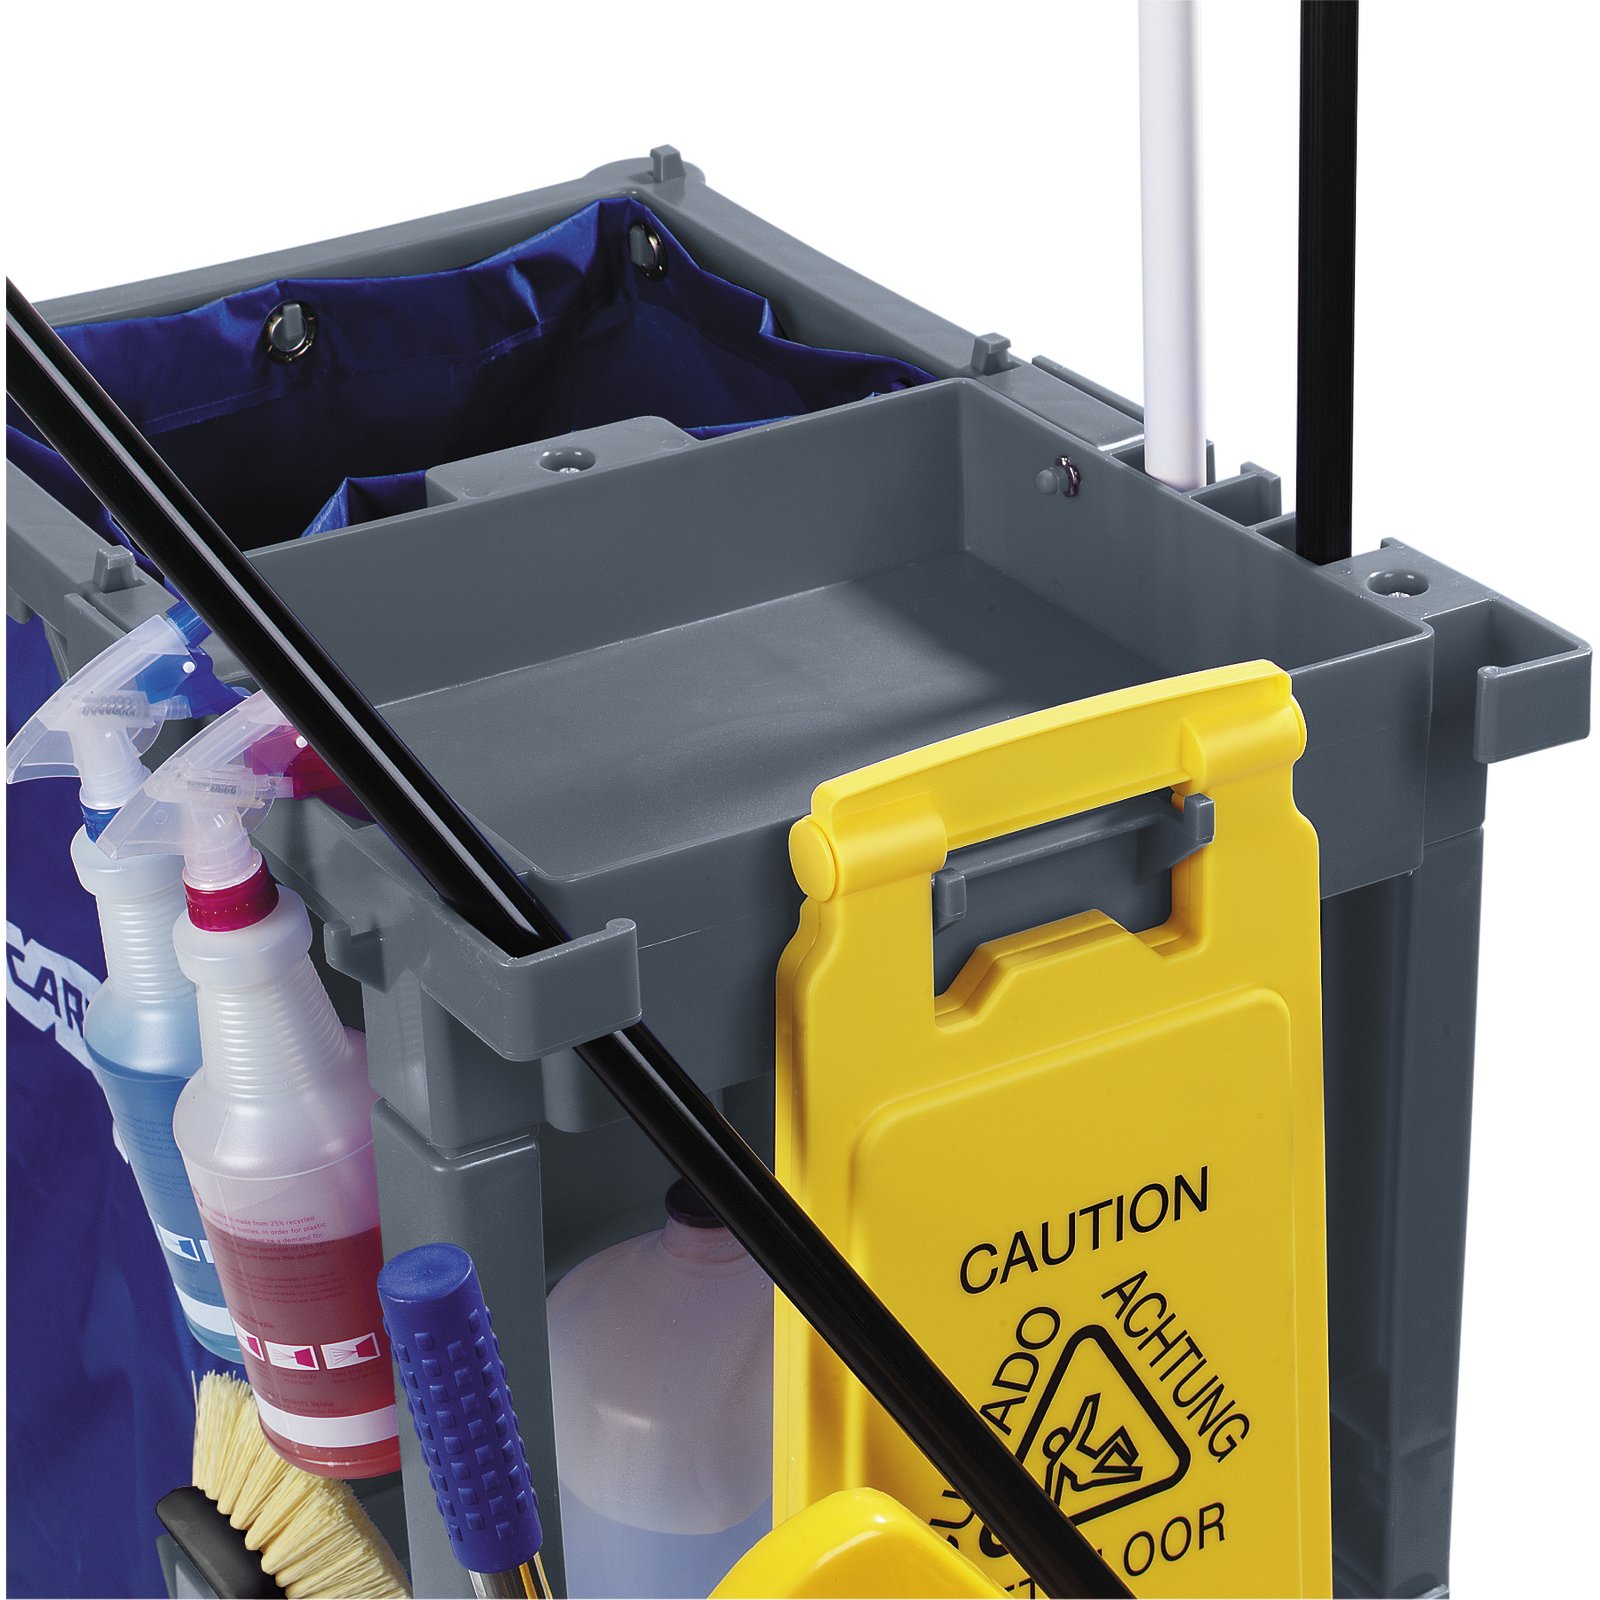 SSS® Janitor Cart - Grey  Empire Janitorial Supply Co